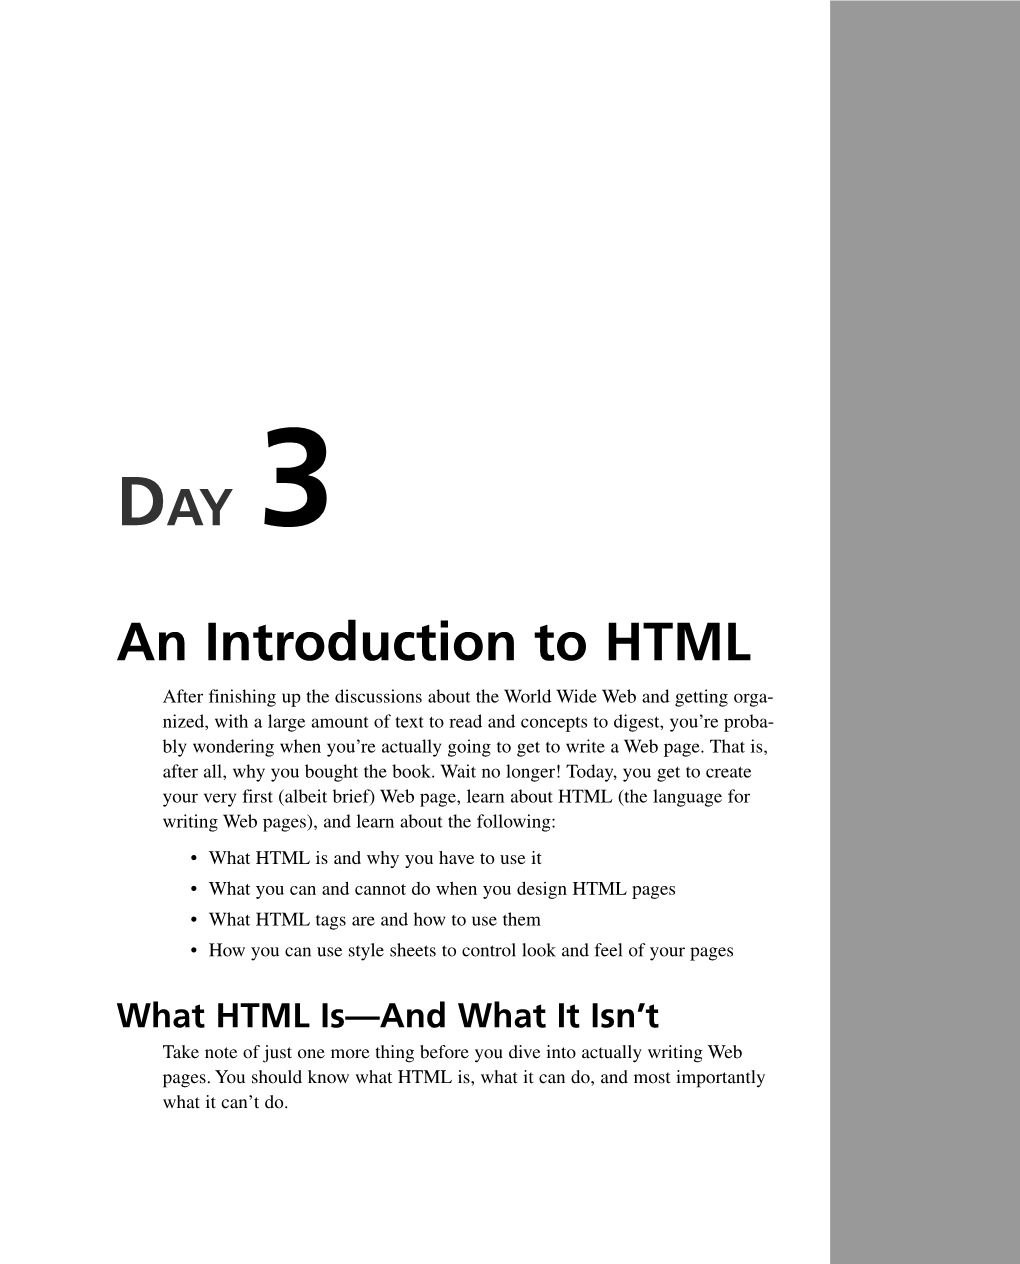 An Introduction to HTML